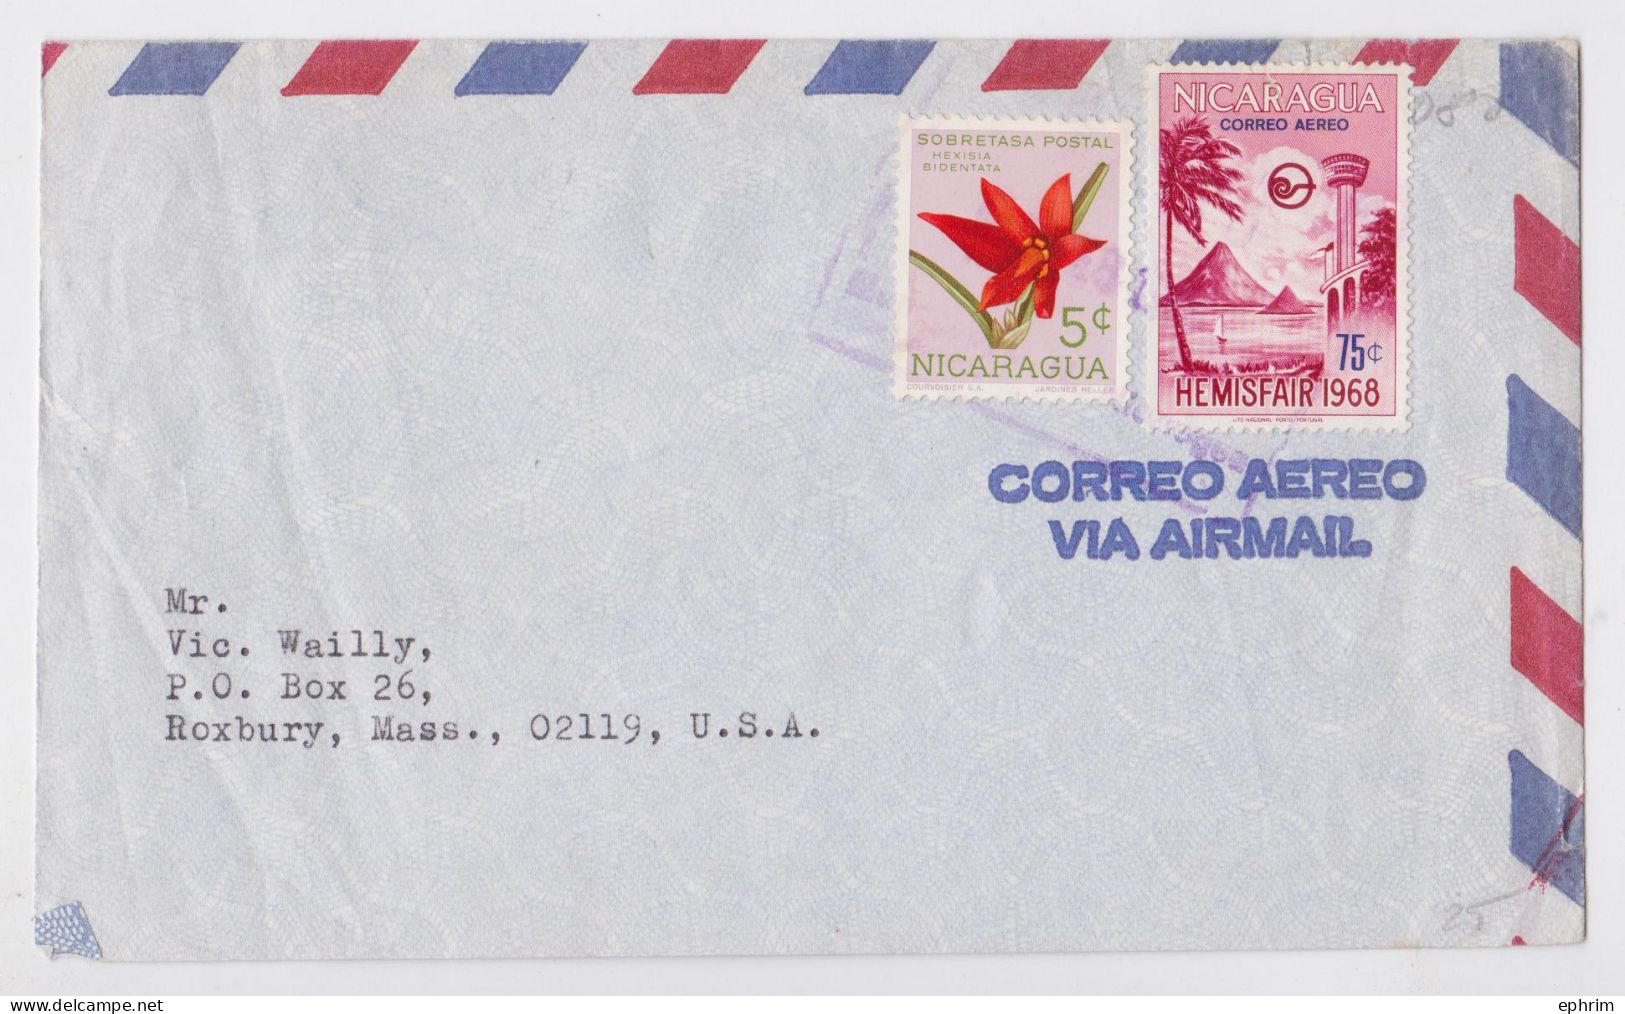 Nicaragua Lettre Timbre Orchidée Hemisfair 1968 Stamp X2 Air Mail Cover Sello Correo Aereo To Roxbury - Nicaragua